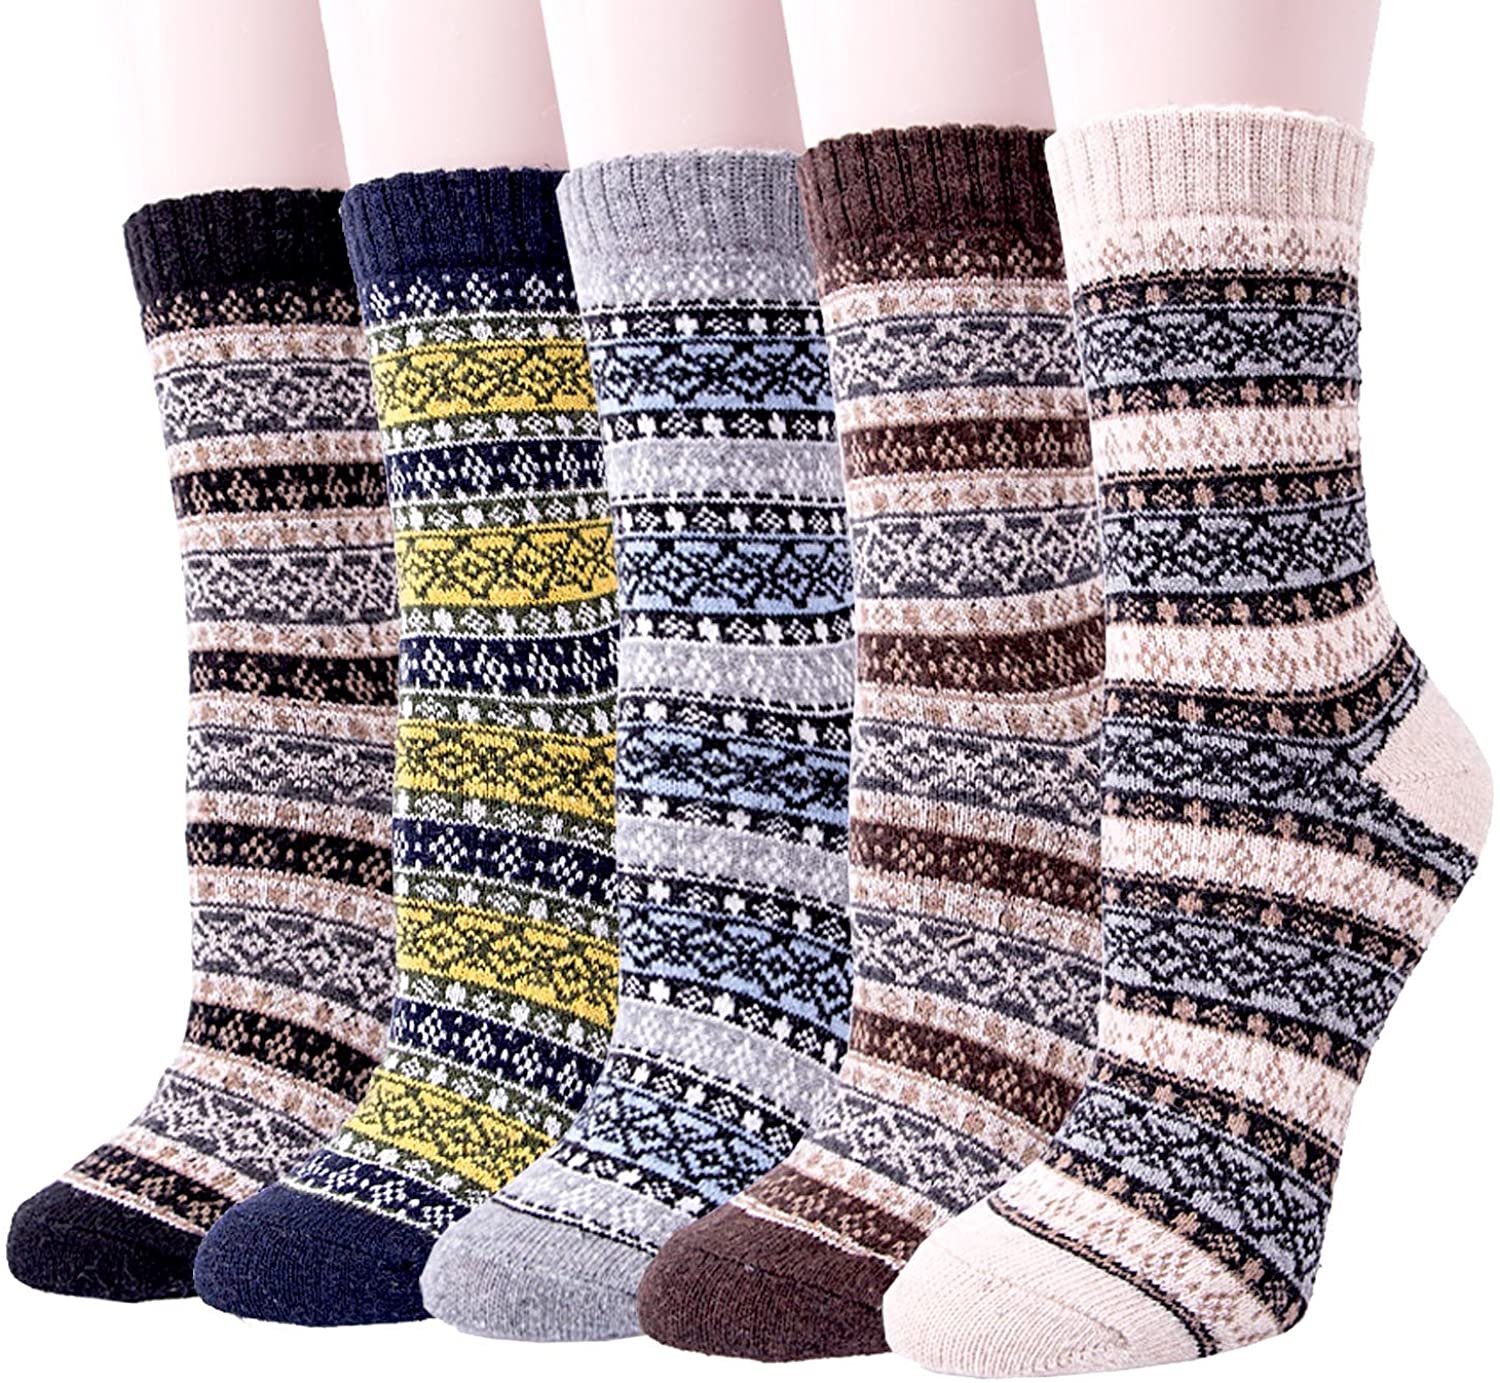 Knit Wool Socks, Cozy Winter Socks, Thick Boot Socks, Cottage Socks, Thick  Wool Socks, Women's Wool Socks, Hand Knit Socks, Gift for Her -  Israel